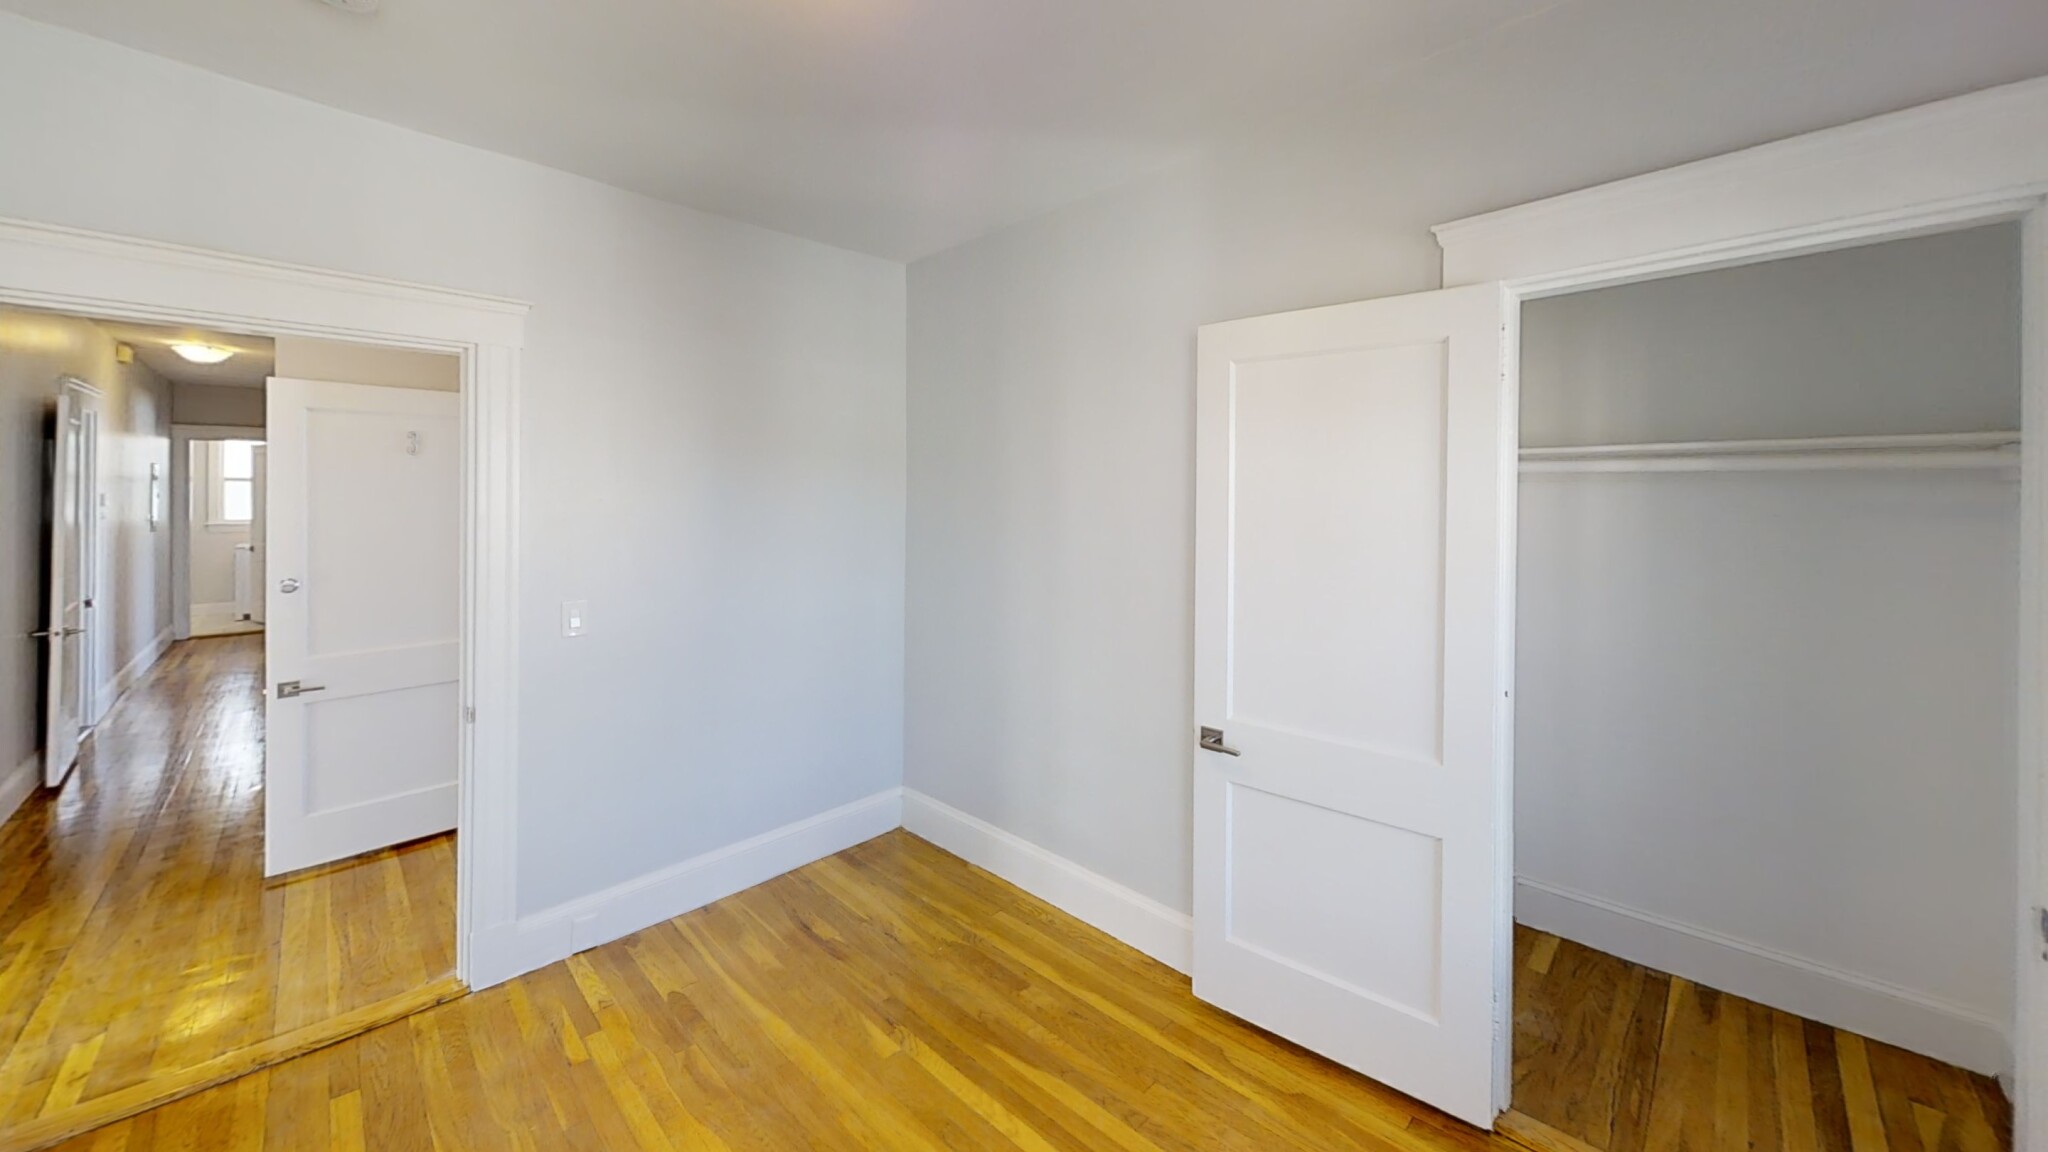 Photos of apartment on Mansfield,Somerville MA 02143